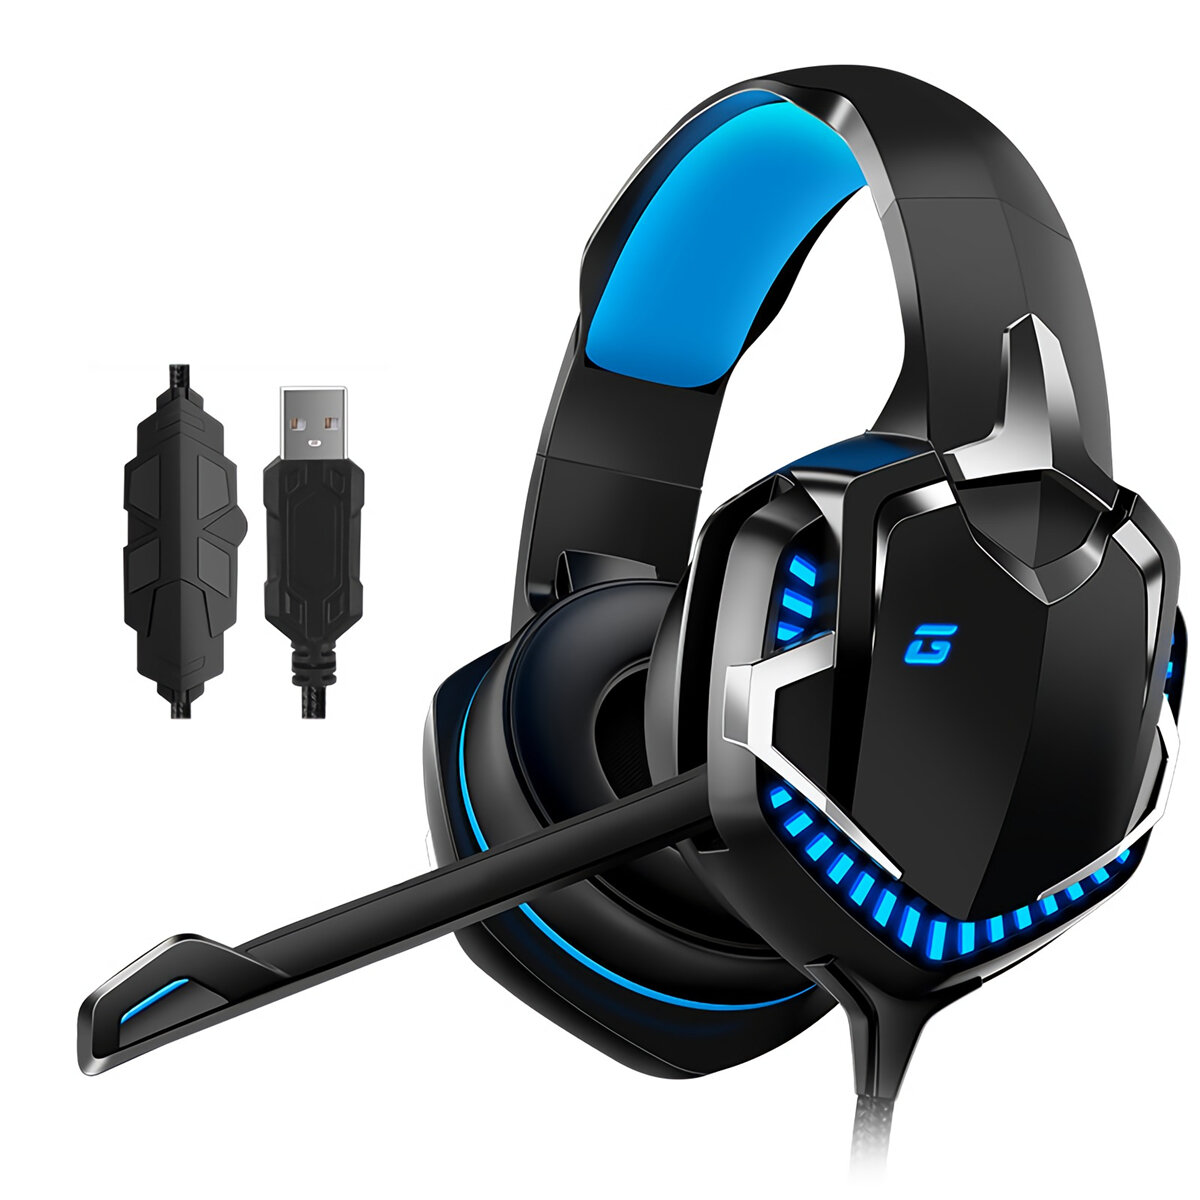 

MC N20 Wired Game Headphone USB 7.1 Channel 4D Surounding Sound 50mm Driver Gaming Headset with Mic for Computer PC Game